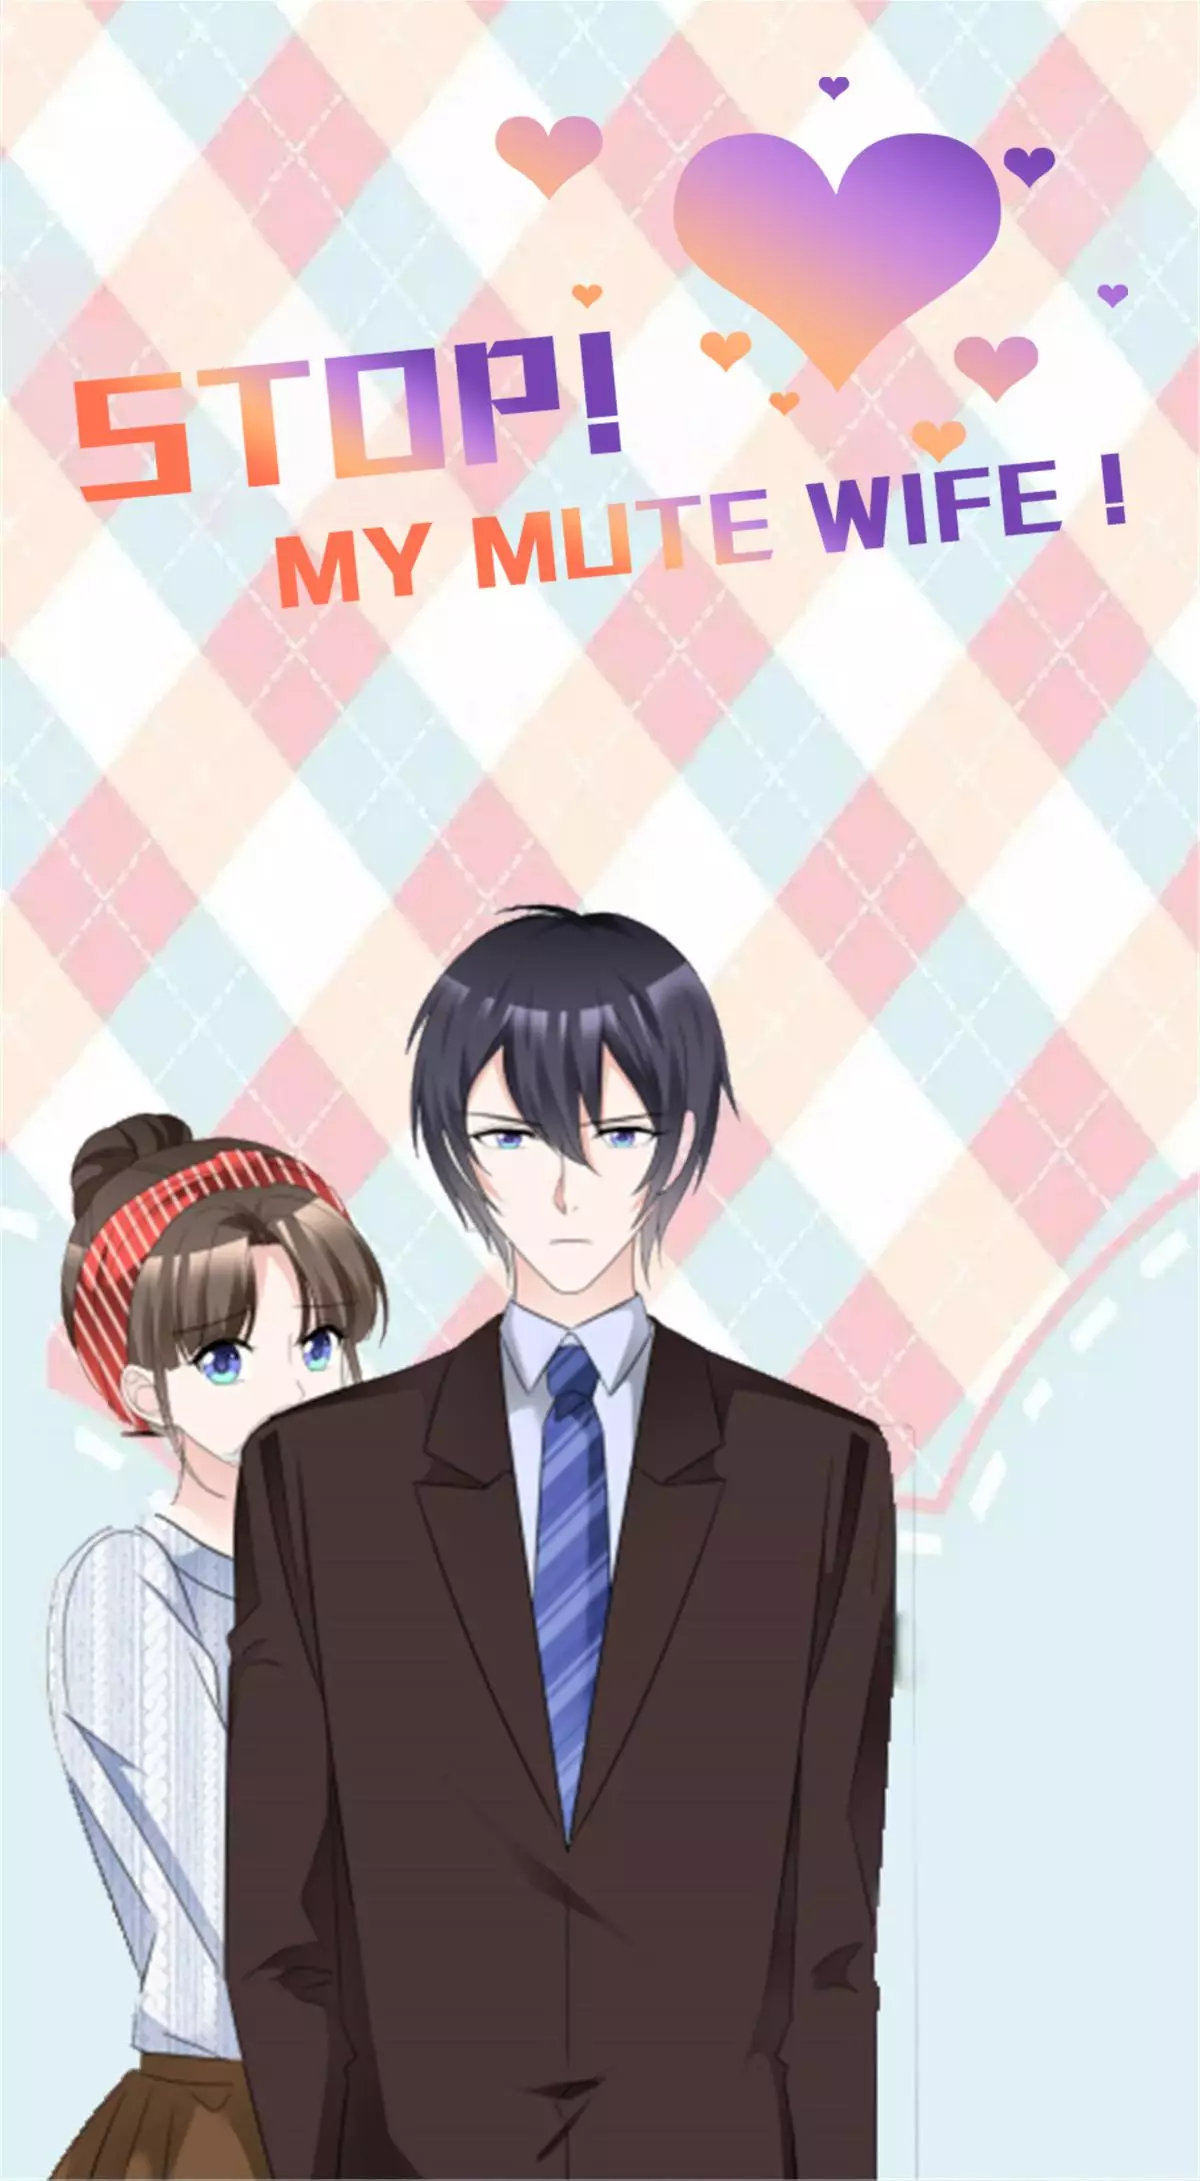 Stop, My Mute Wife! - 26 page 1-4bc2d870